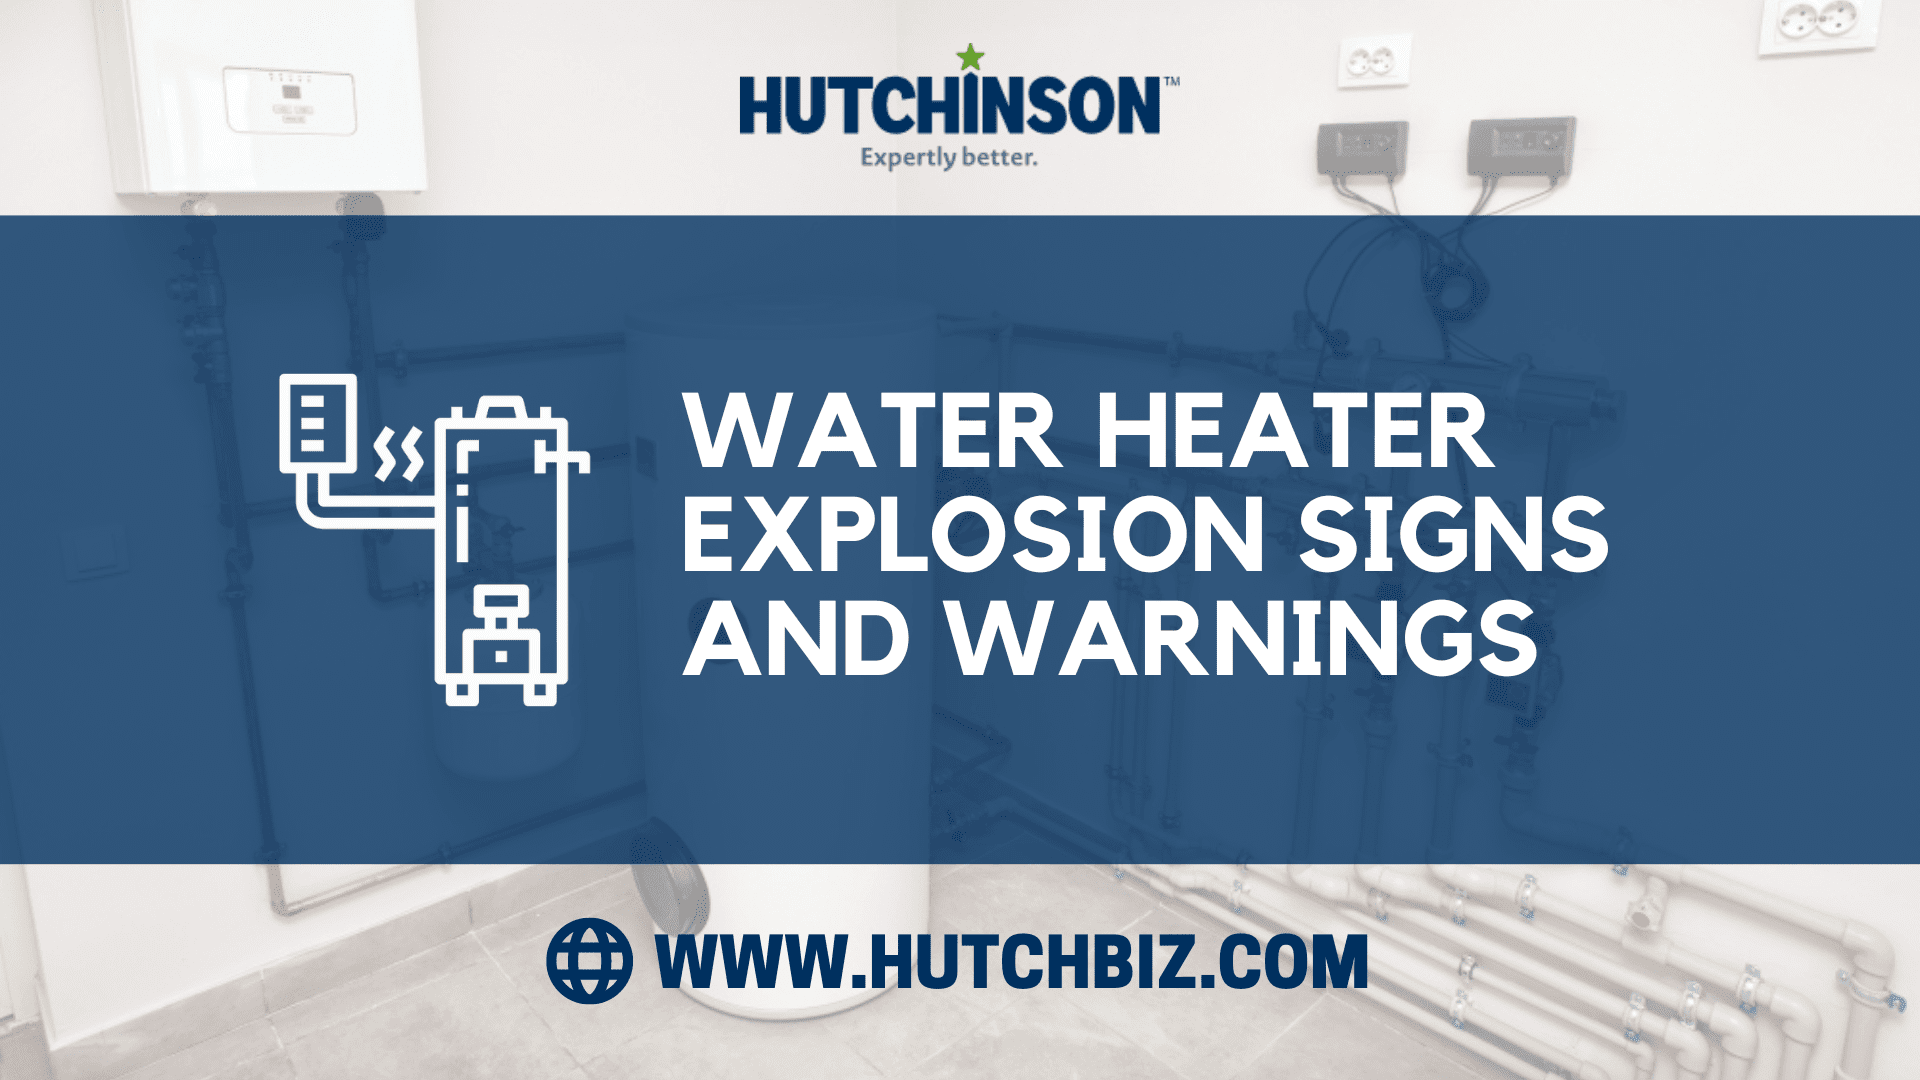 http://www.hutchbiz.com/wp-content/uploads/2023/04/Water-Heater-Explosion-Signs-and-Warnings.png